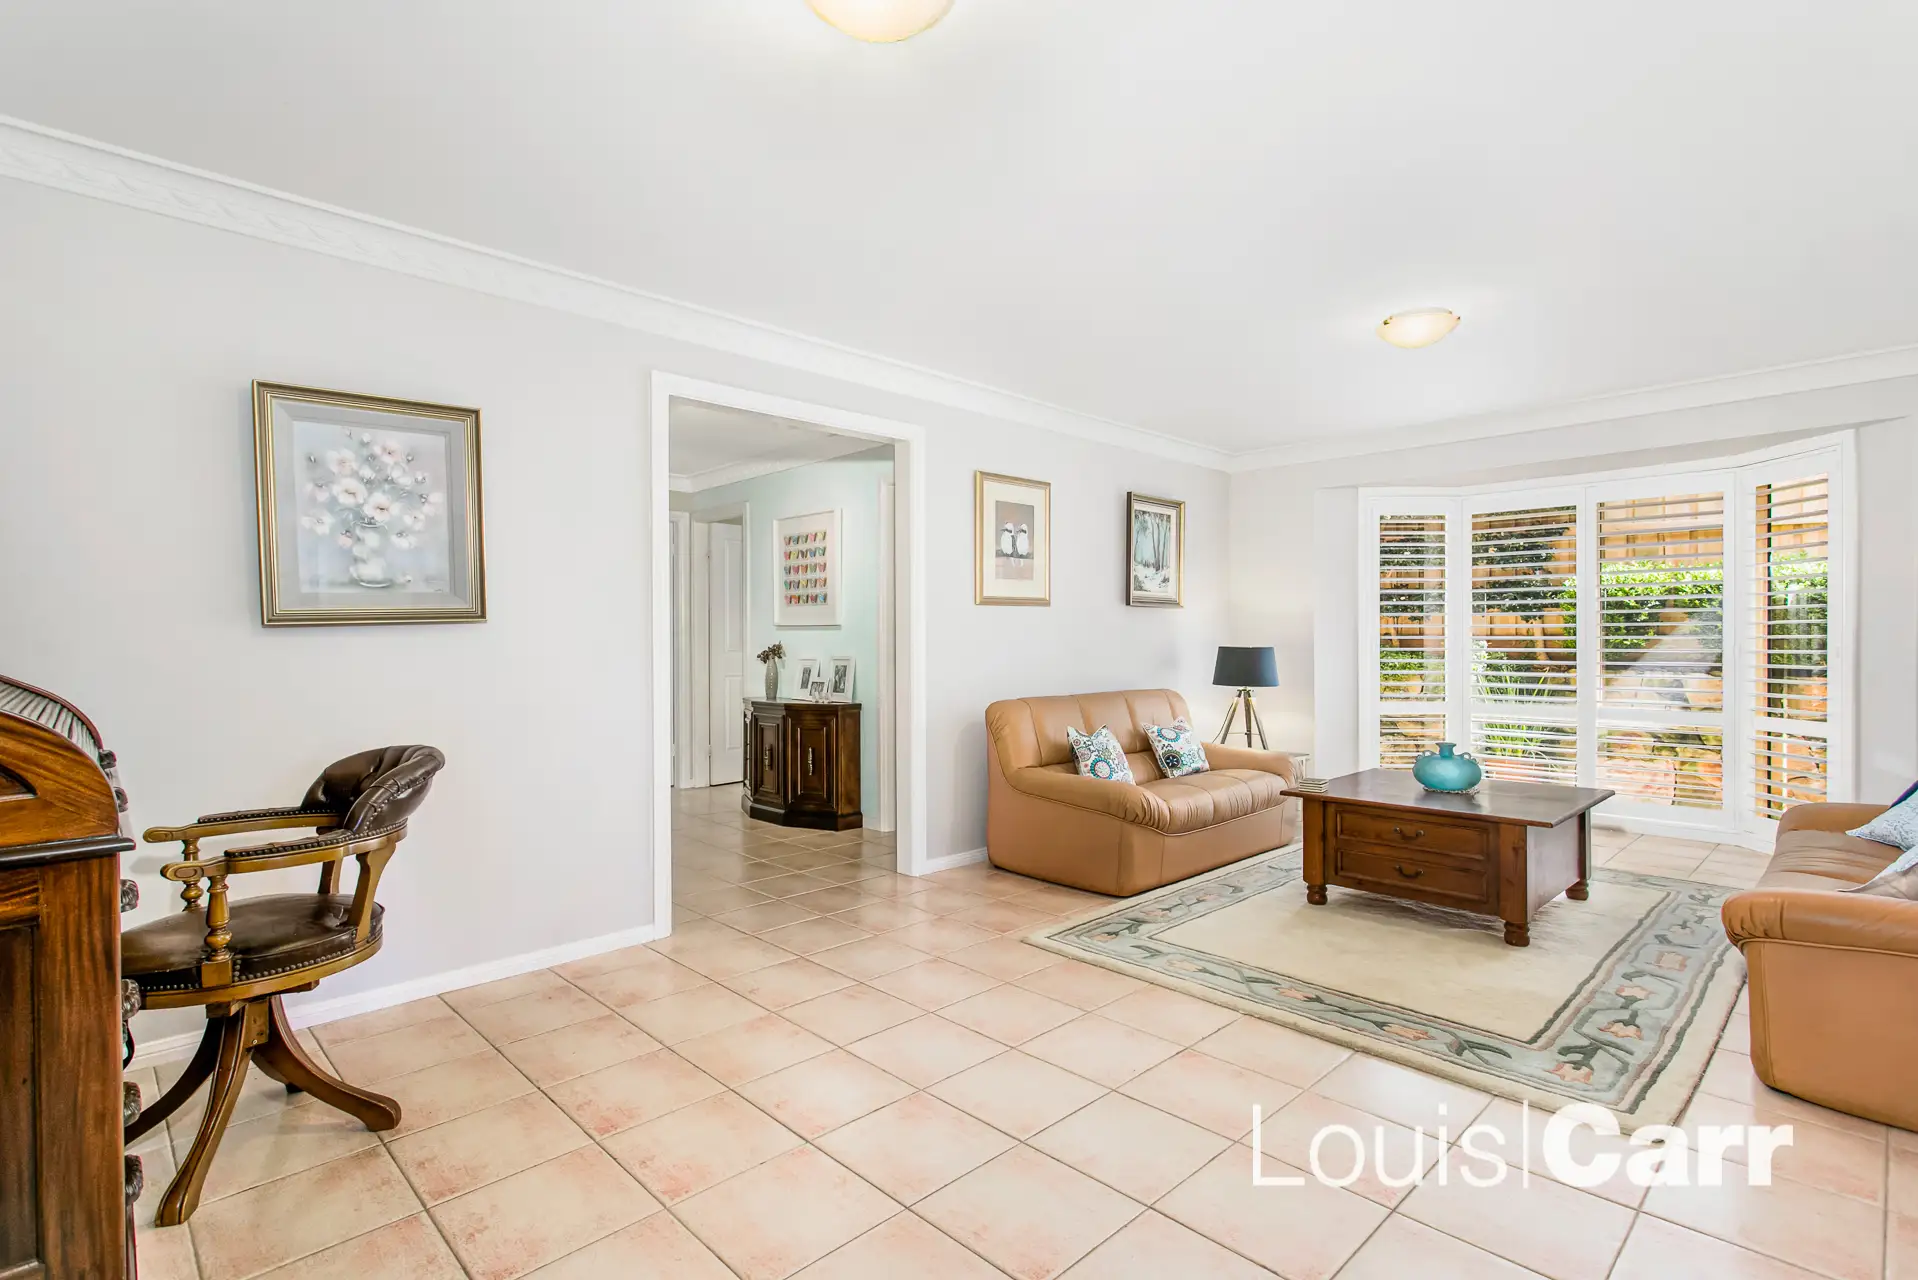 Photo #4: 24 Haven Court, Cherrybrook - Sold by Louis Carr Real Estate